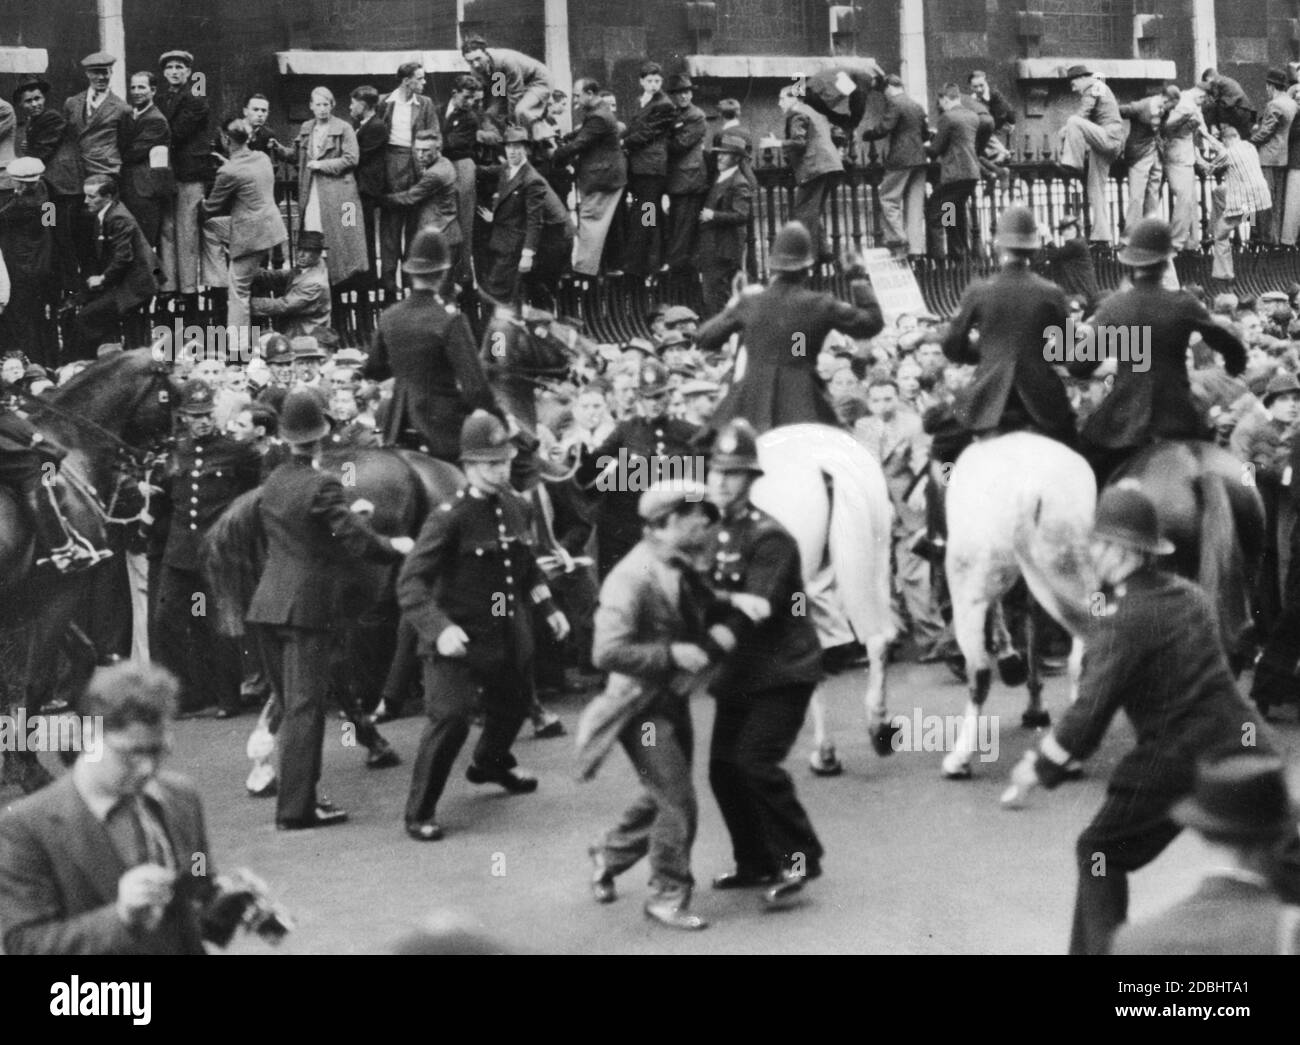 'Clashes between demonstrators and police in London. On the occasion of a planned march of the ''British Union of Fascists'' (BUF) numerous counter-demonstrators gathered in London.' Stock Photo